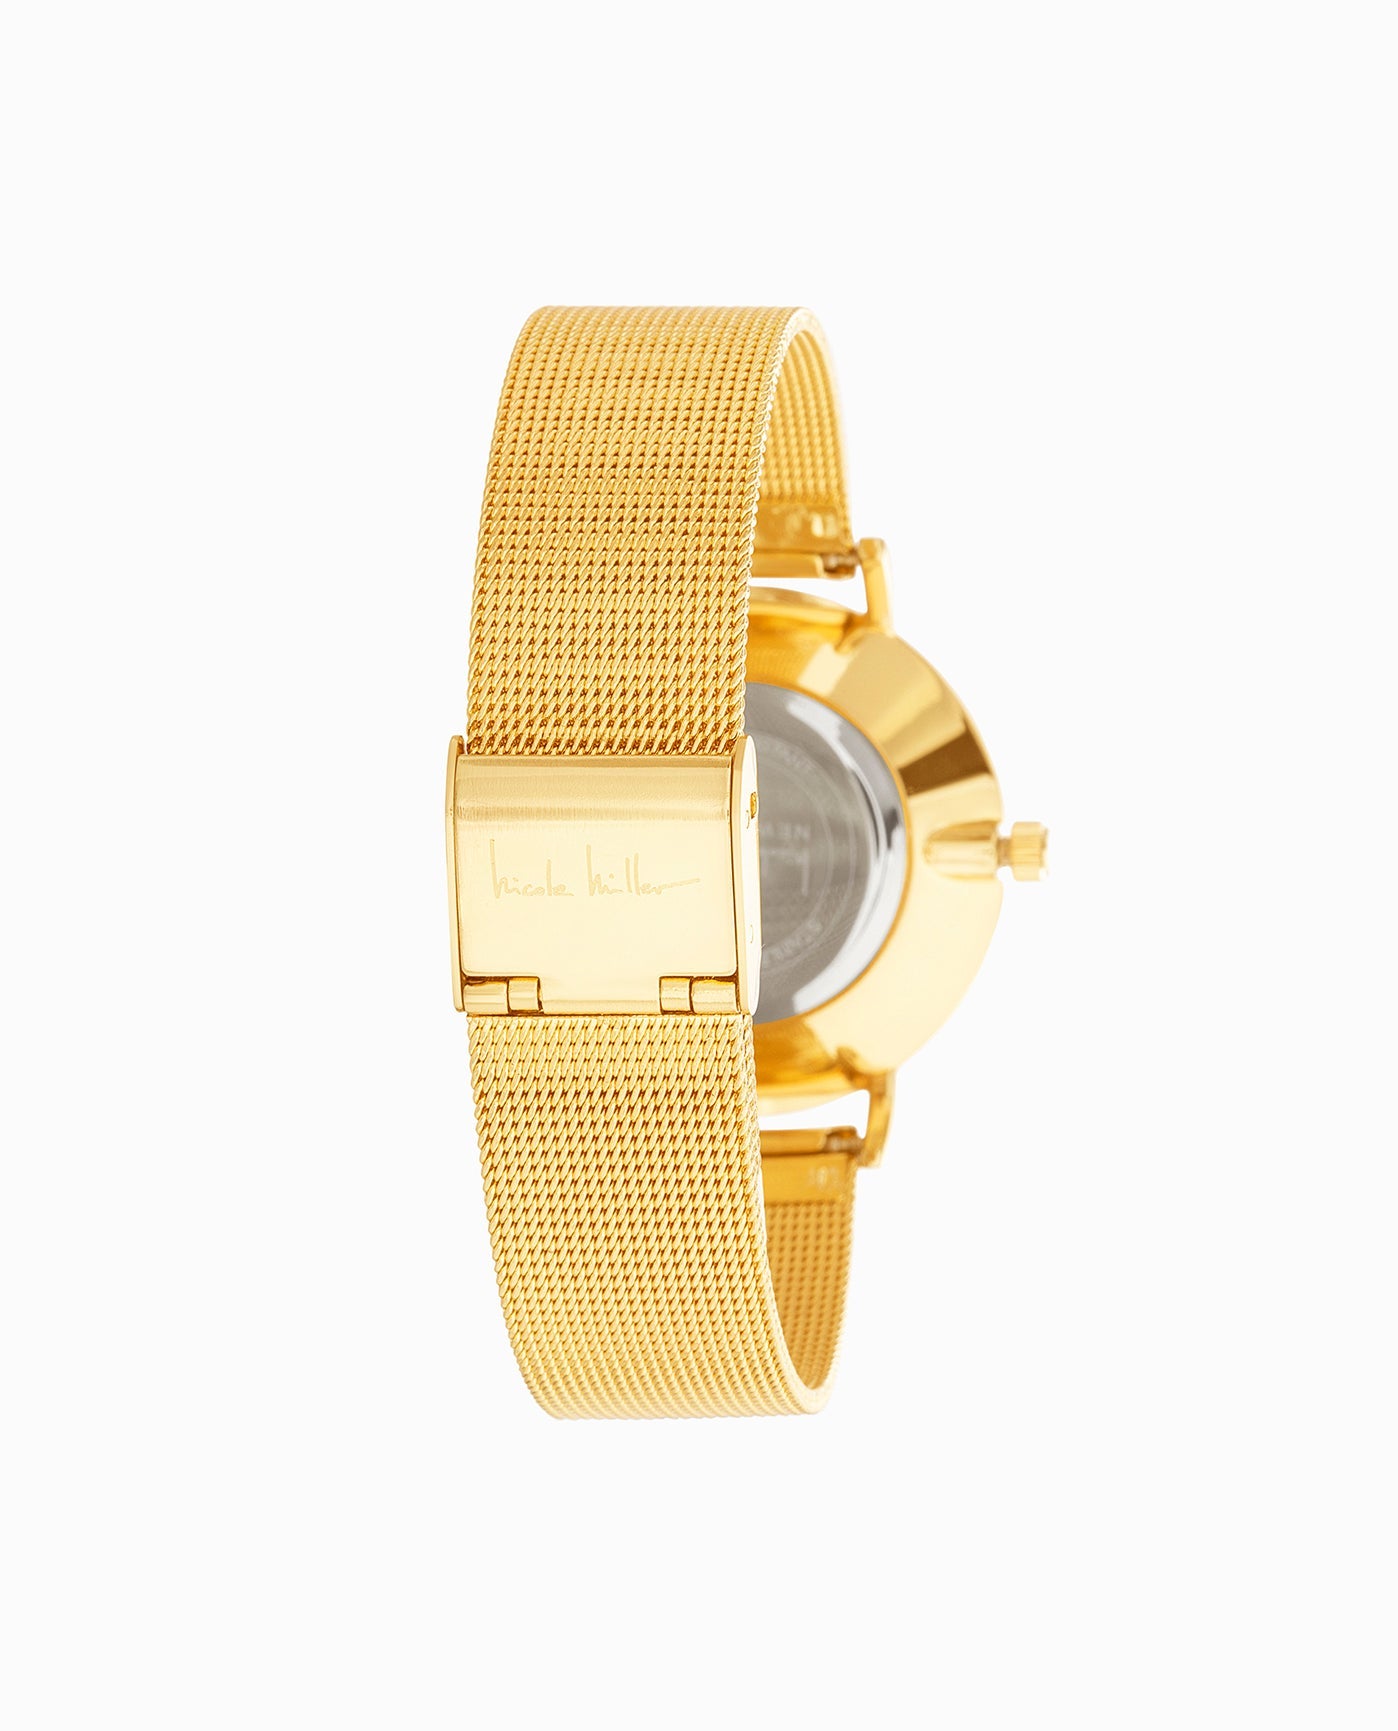 Buy 26mm - 35mm Watches for Men and Women Online in India. – Hiyath